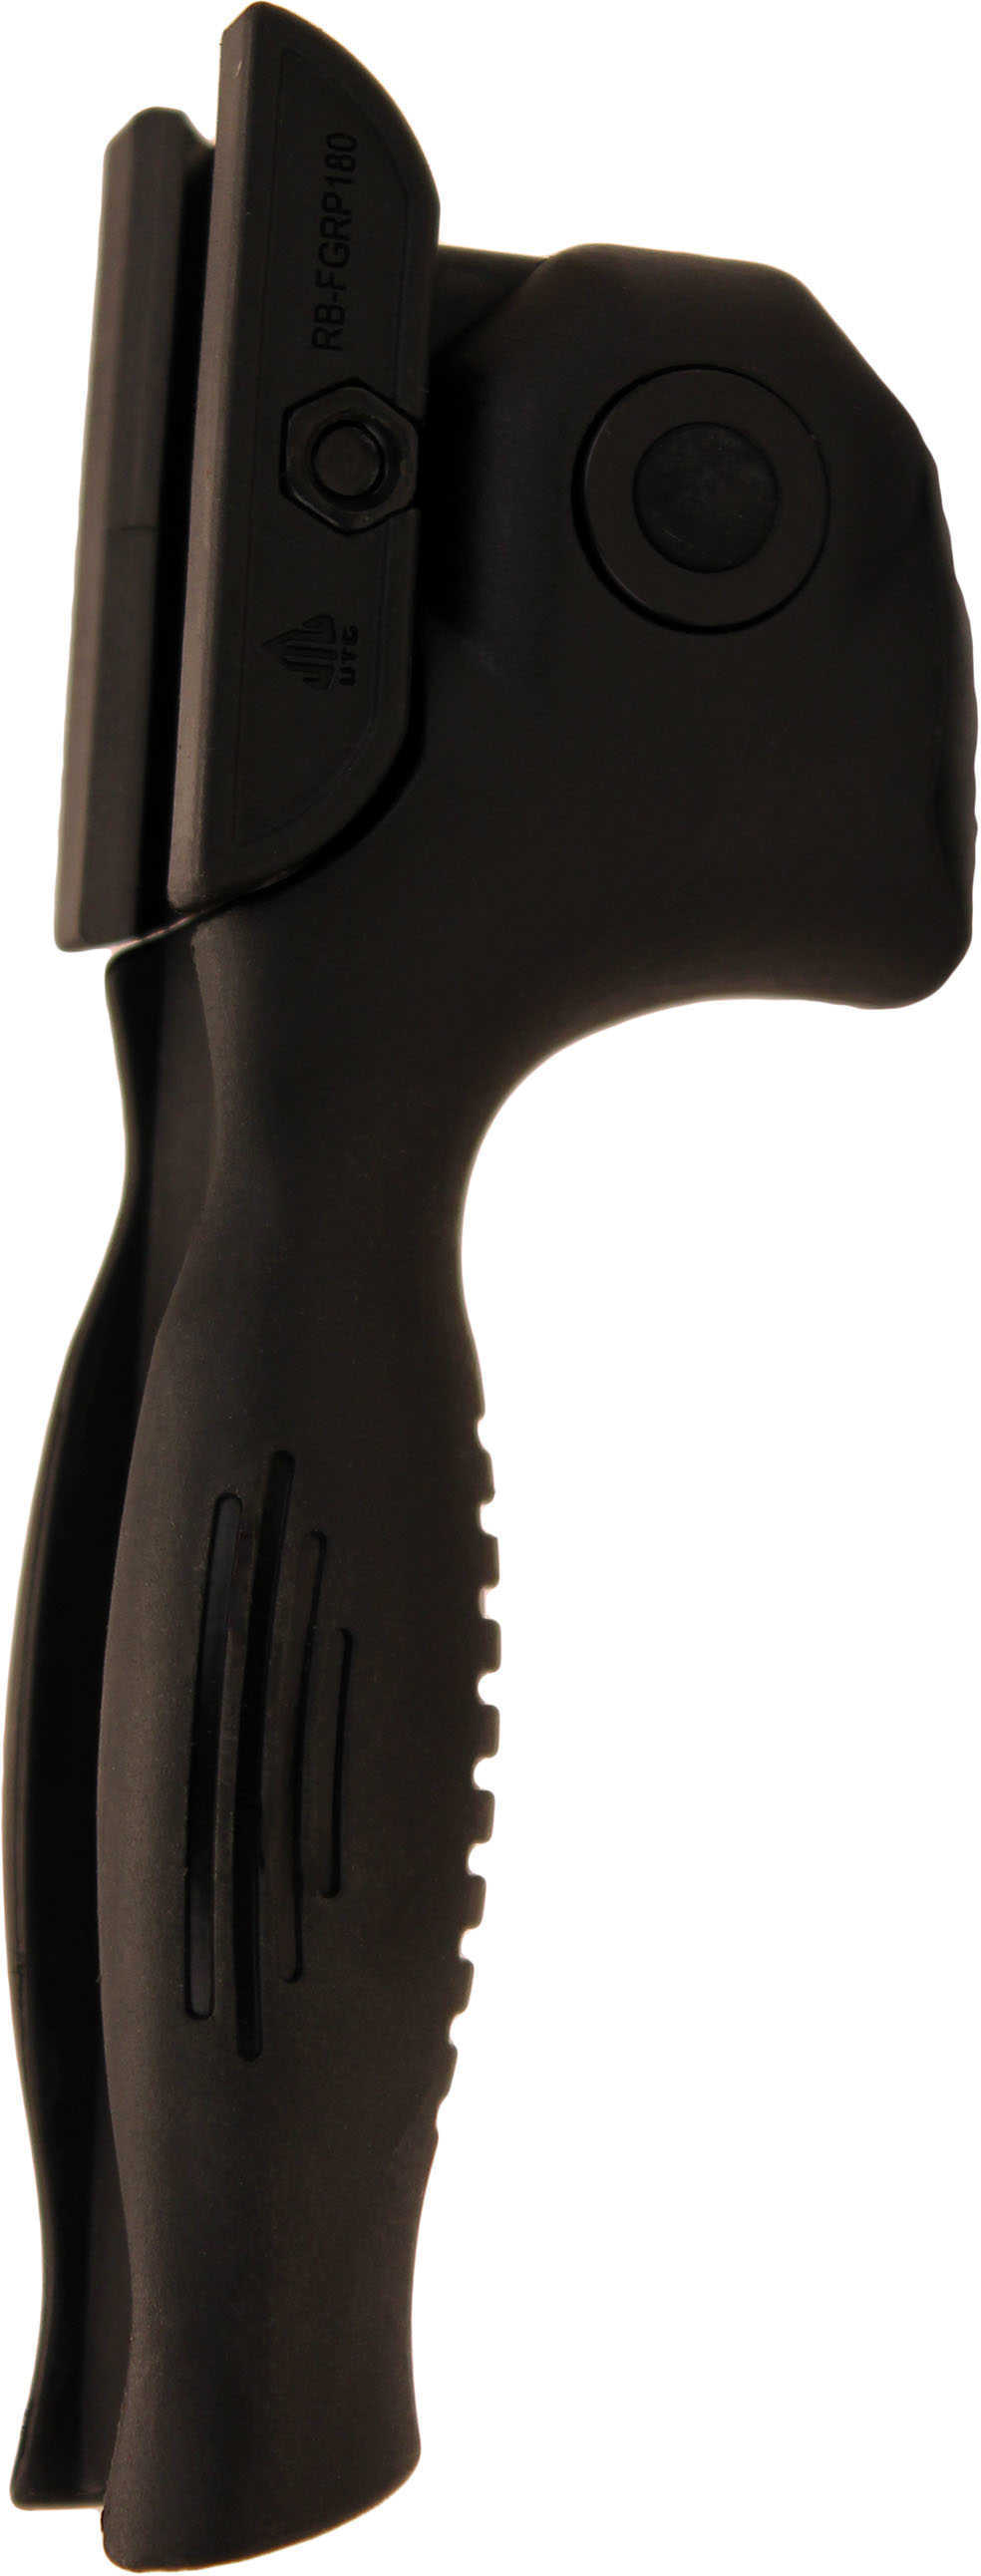 Leapers UTG Apache Foregrip Grip, Black Md: RB-FGRP180B